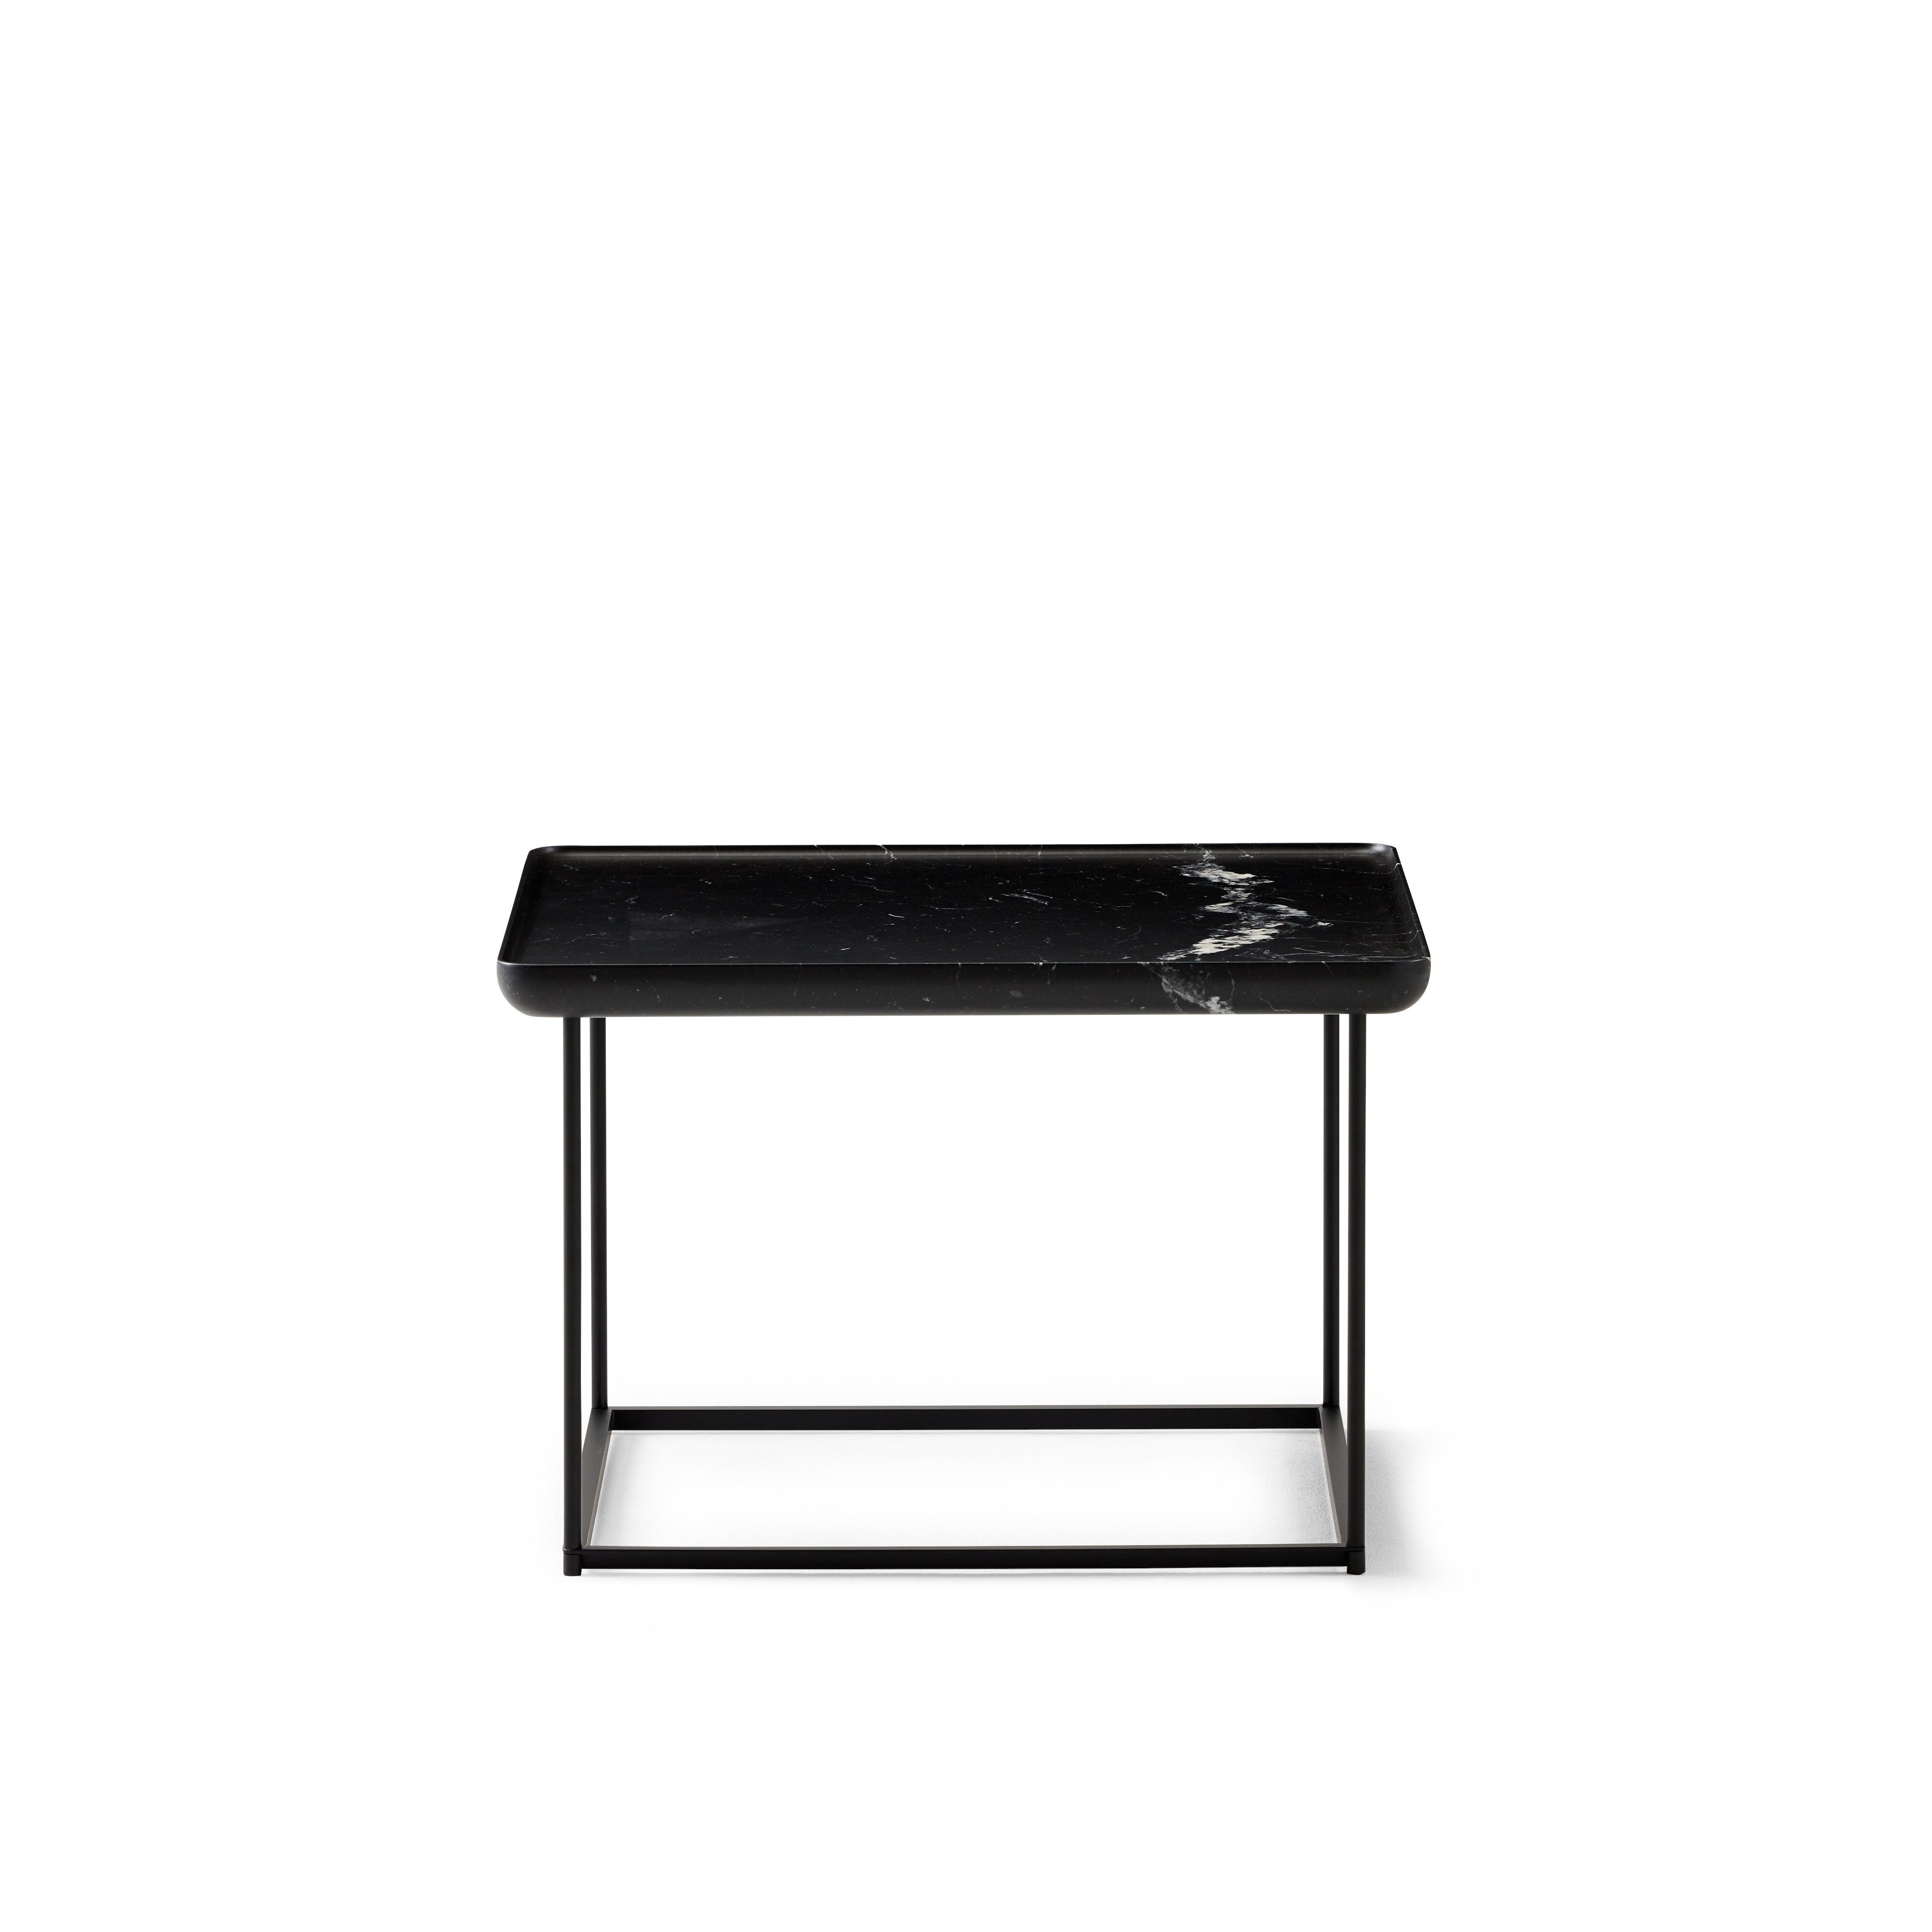 Detail front shot of the Torei table in Black Marquina